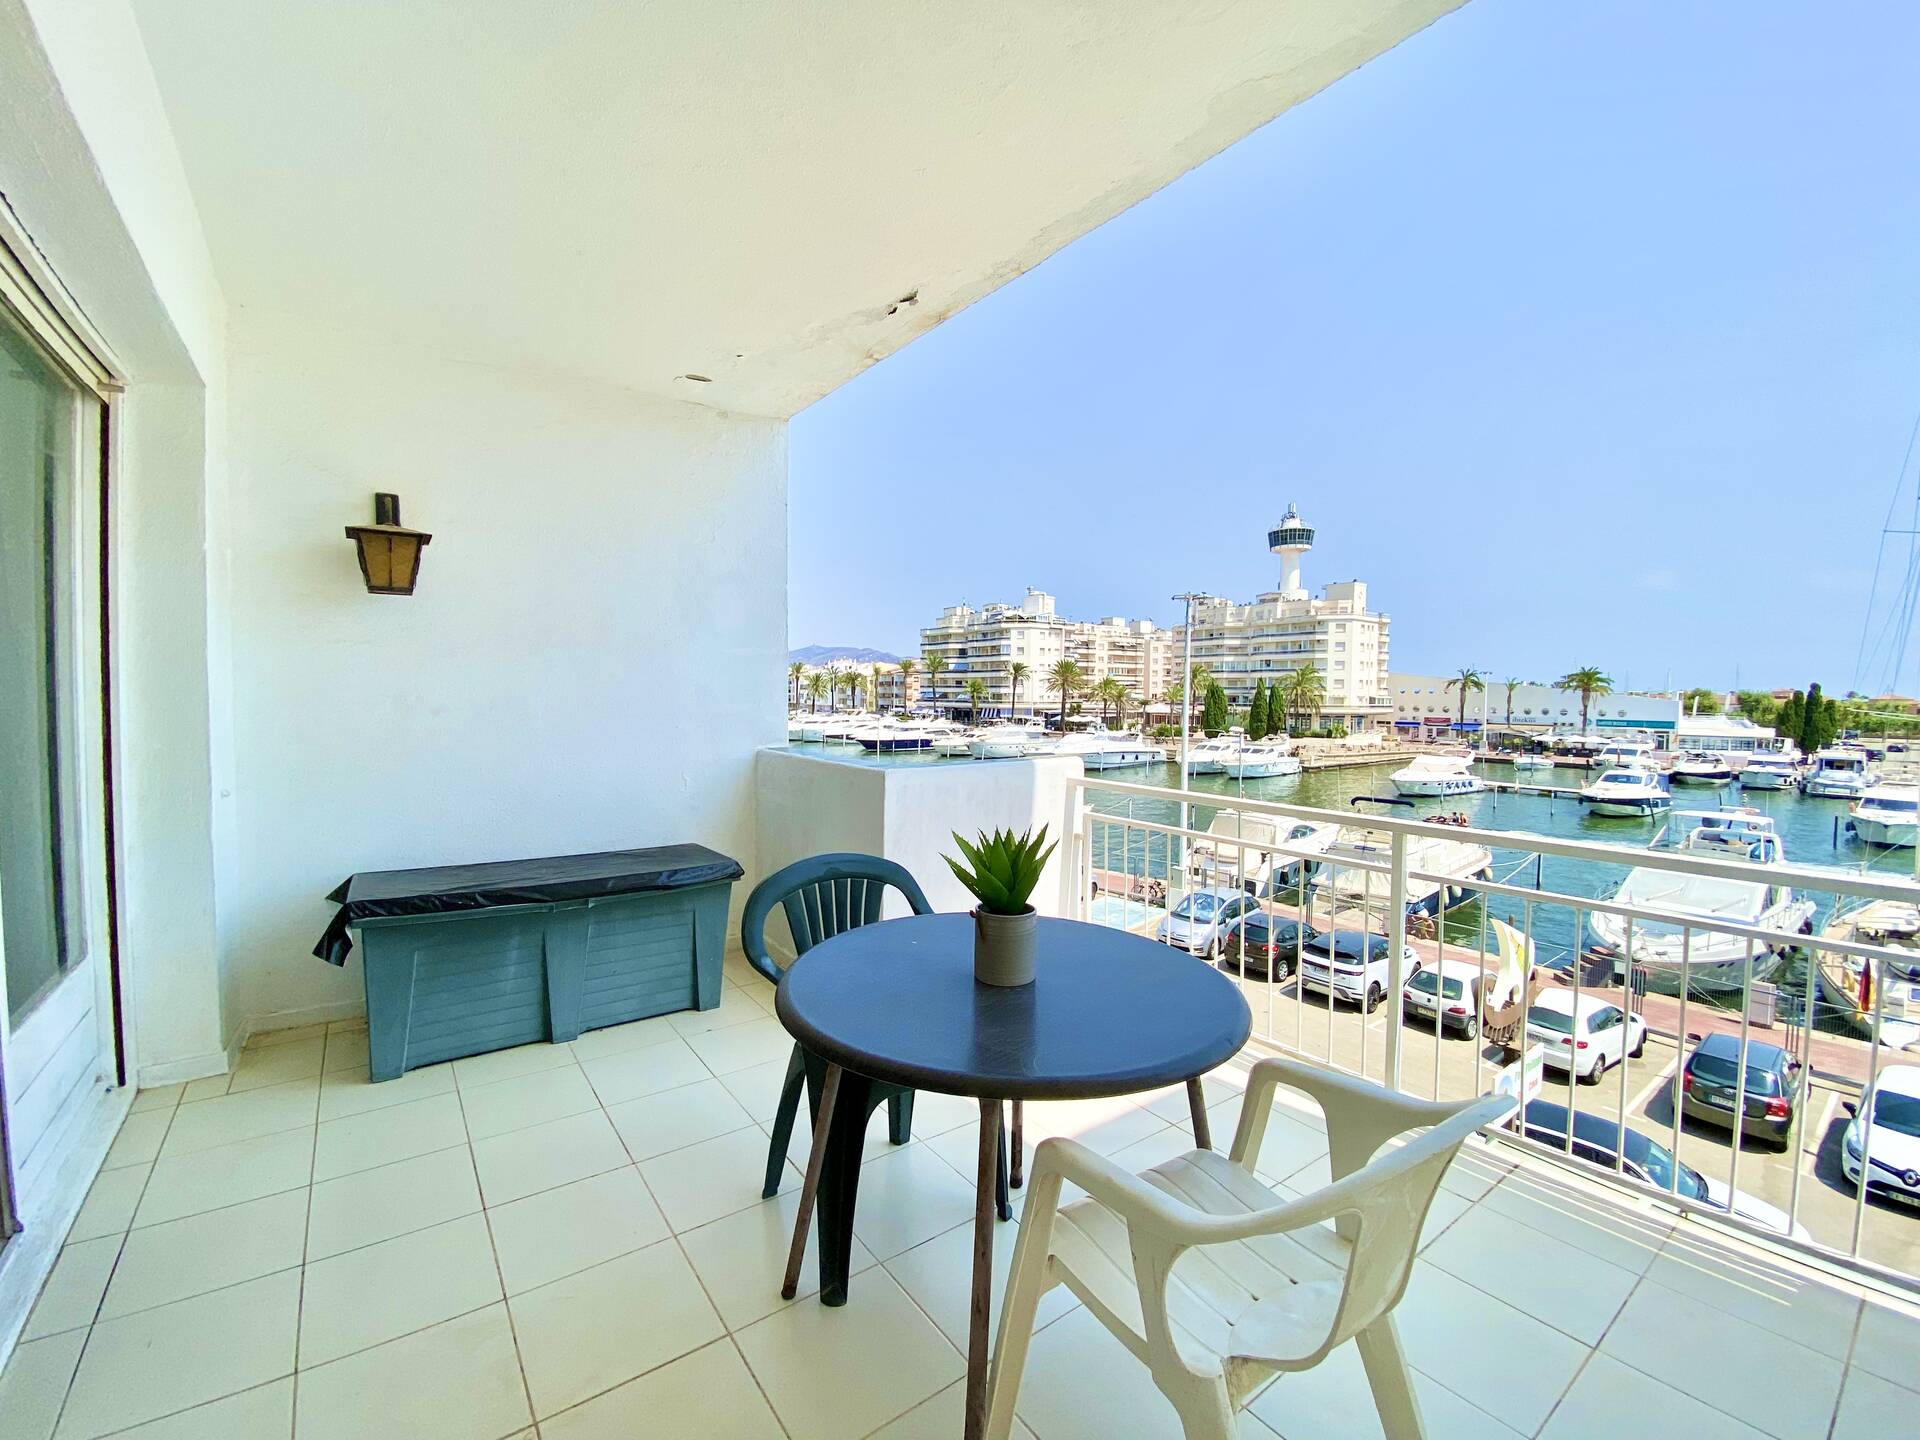 Nice studio with a splendid view over the canal for sale in Empuriabrava